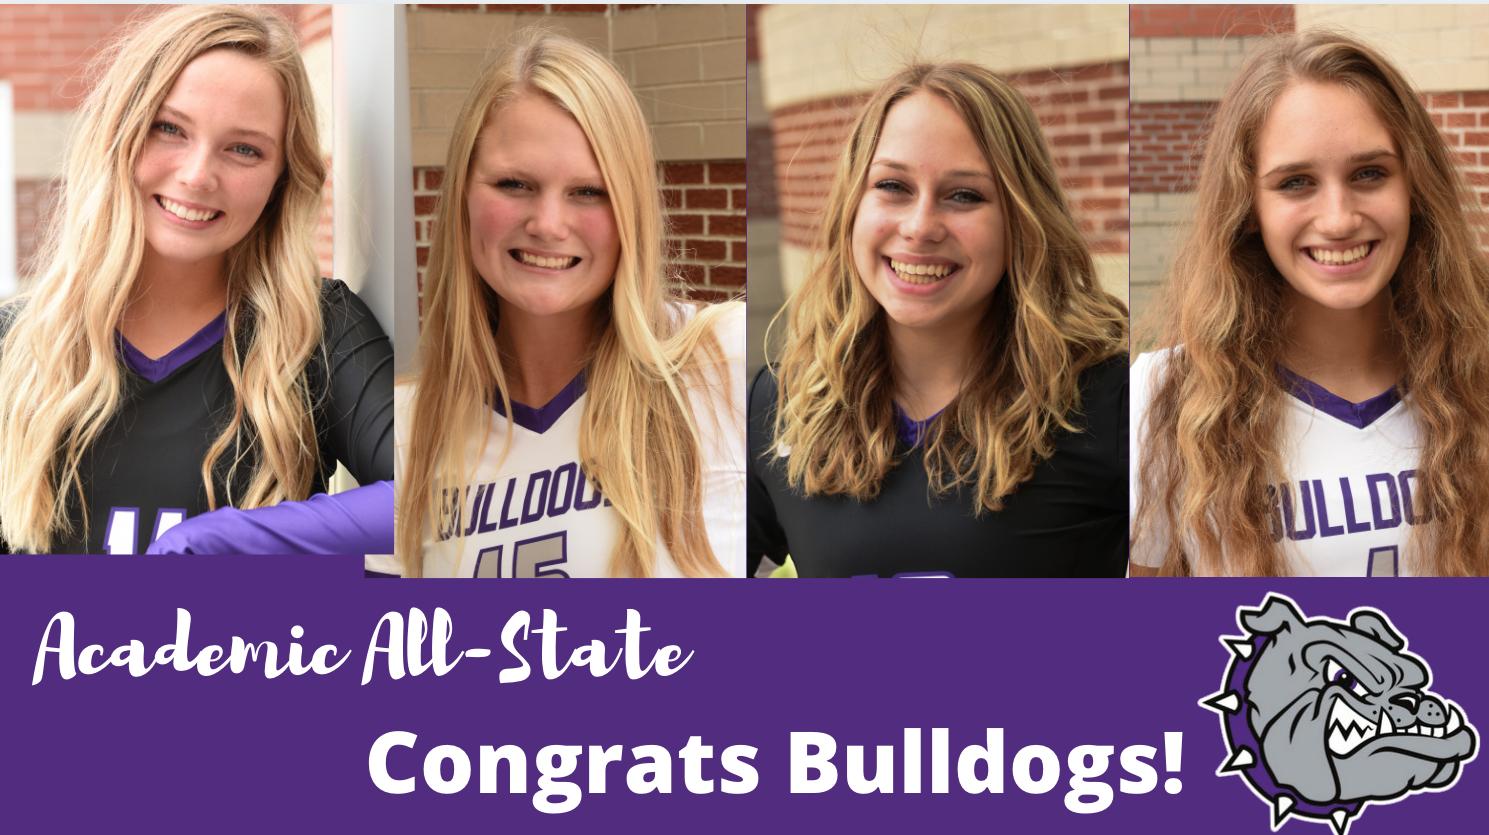 4 Volleyball Seniors Named Academic All-State Players